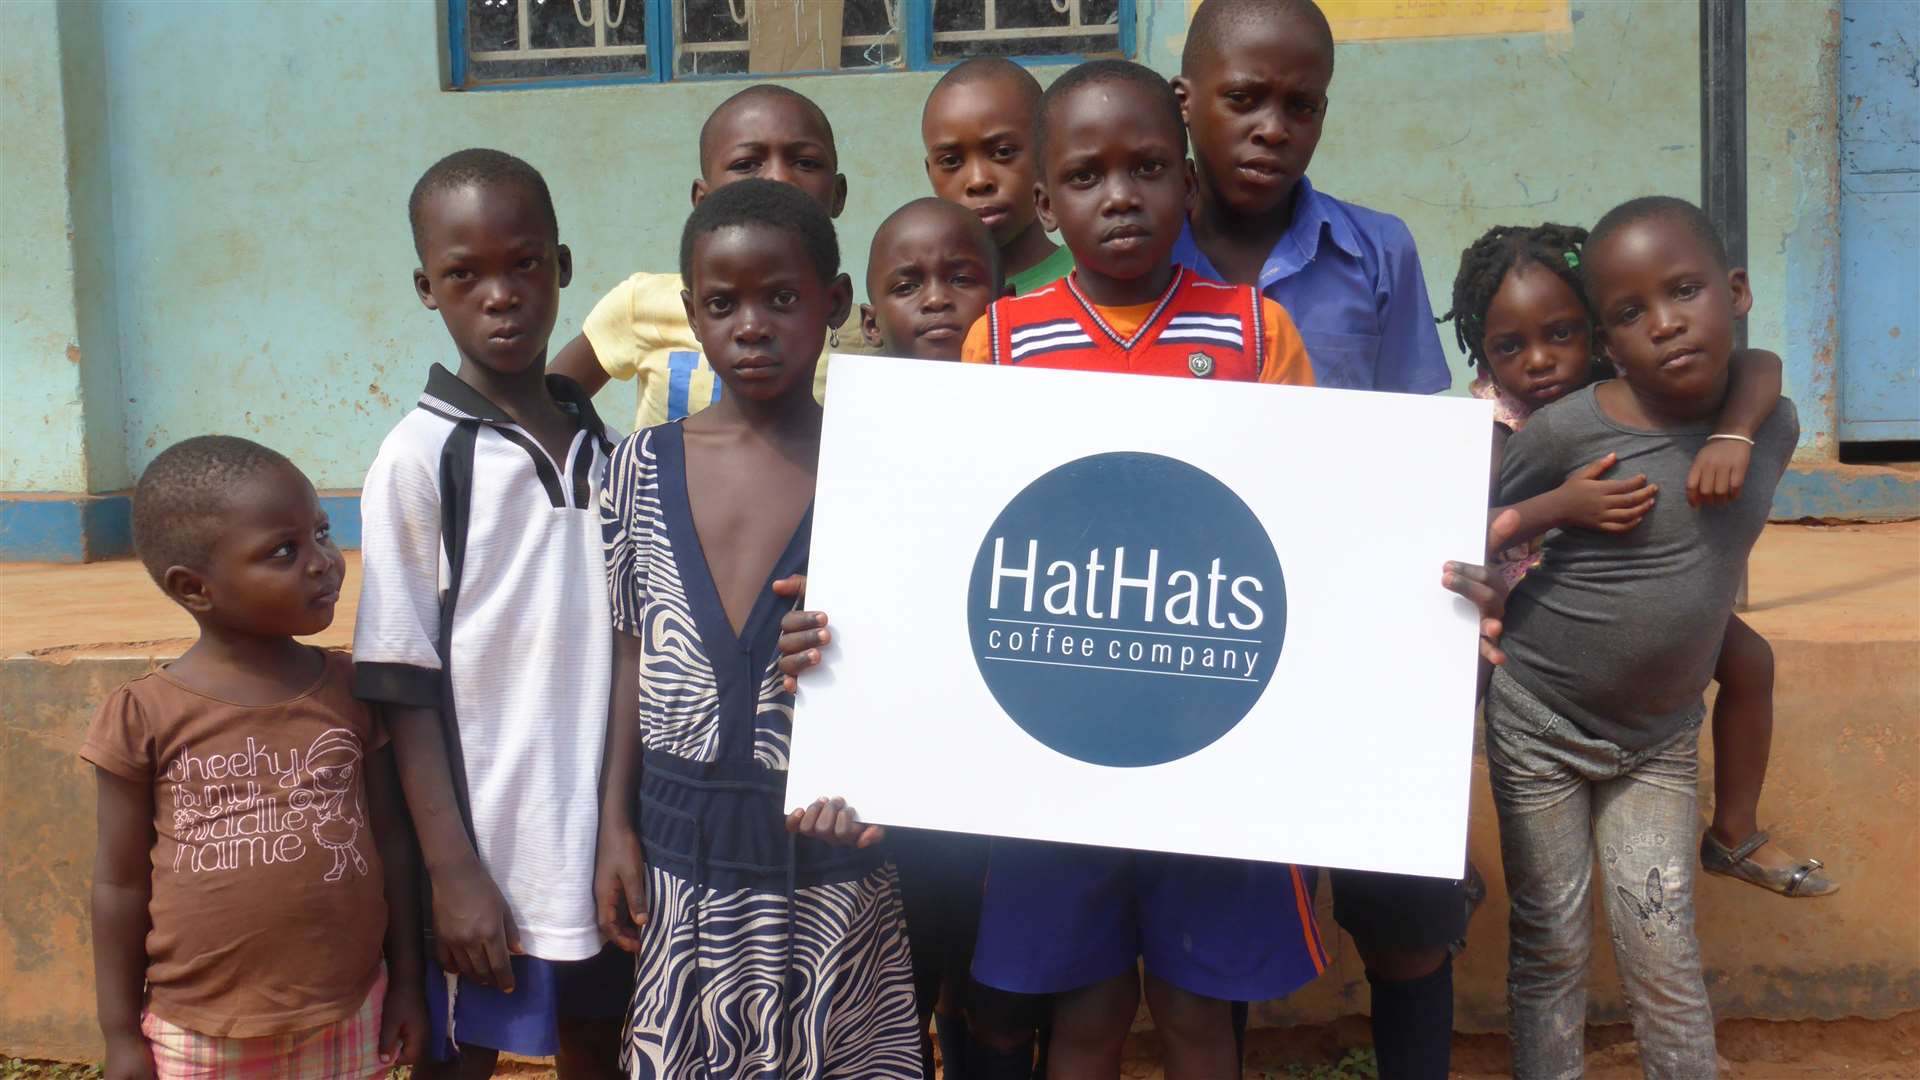 It is hoped HatHats Uganda project will help children with clean water and job prospects